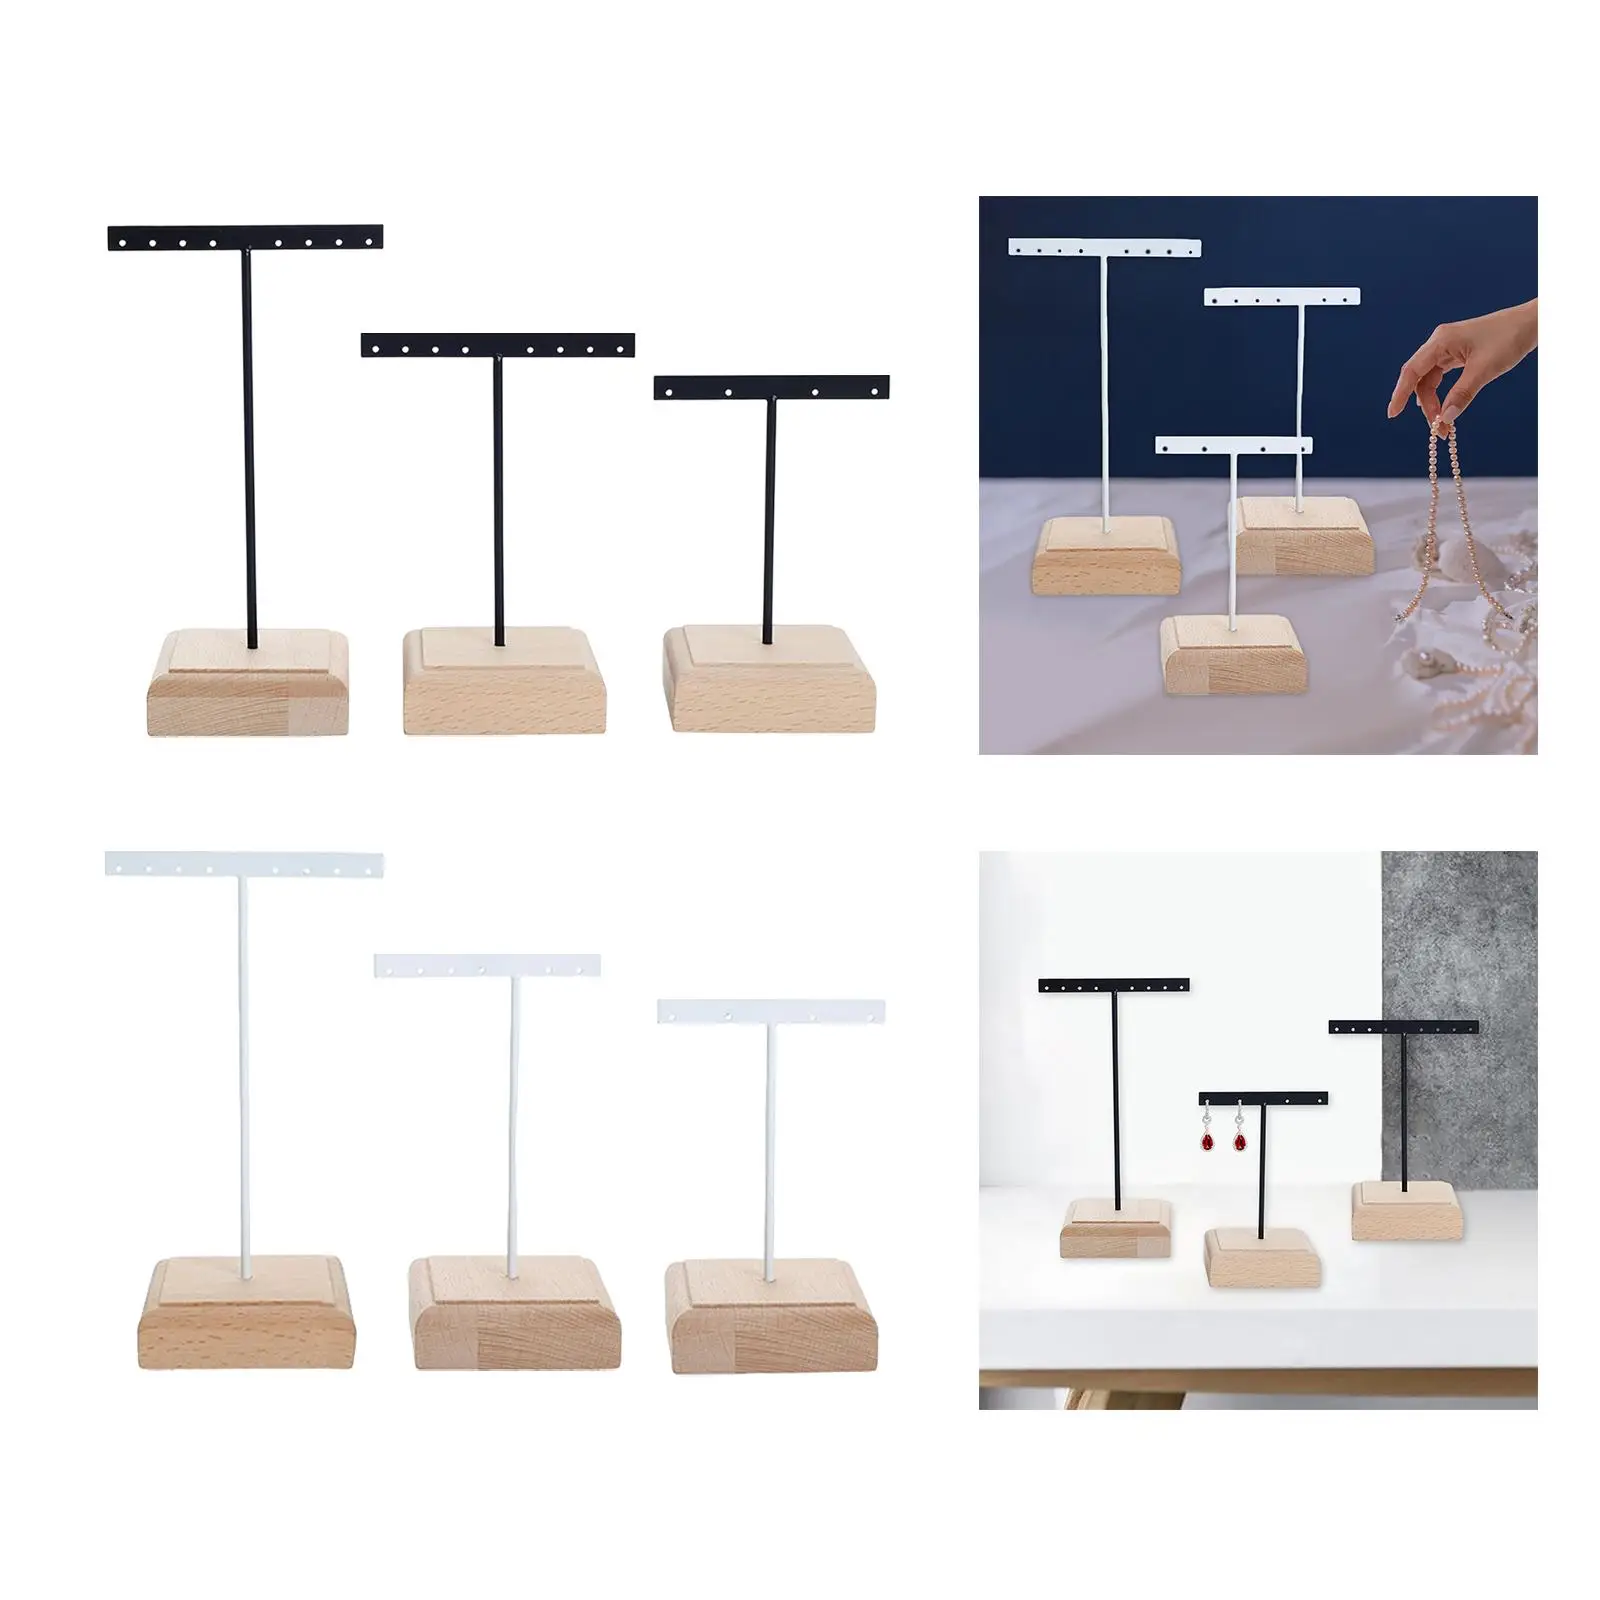 3 Pieces T Bar Earrings Display Stand Wooden Base Hanging Rack Jewelry Organizer for Bangles Selling Retail Showroom Show Shops